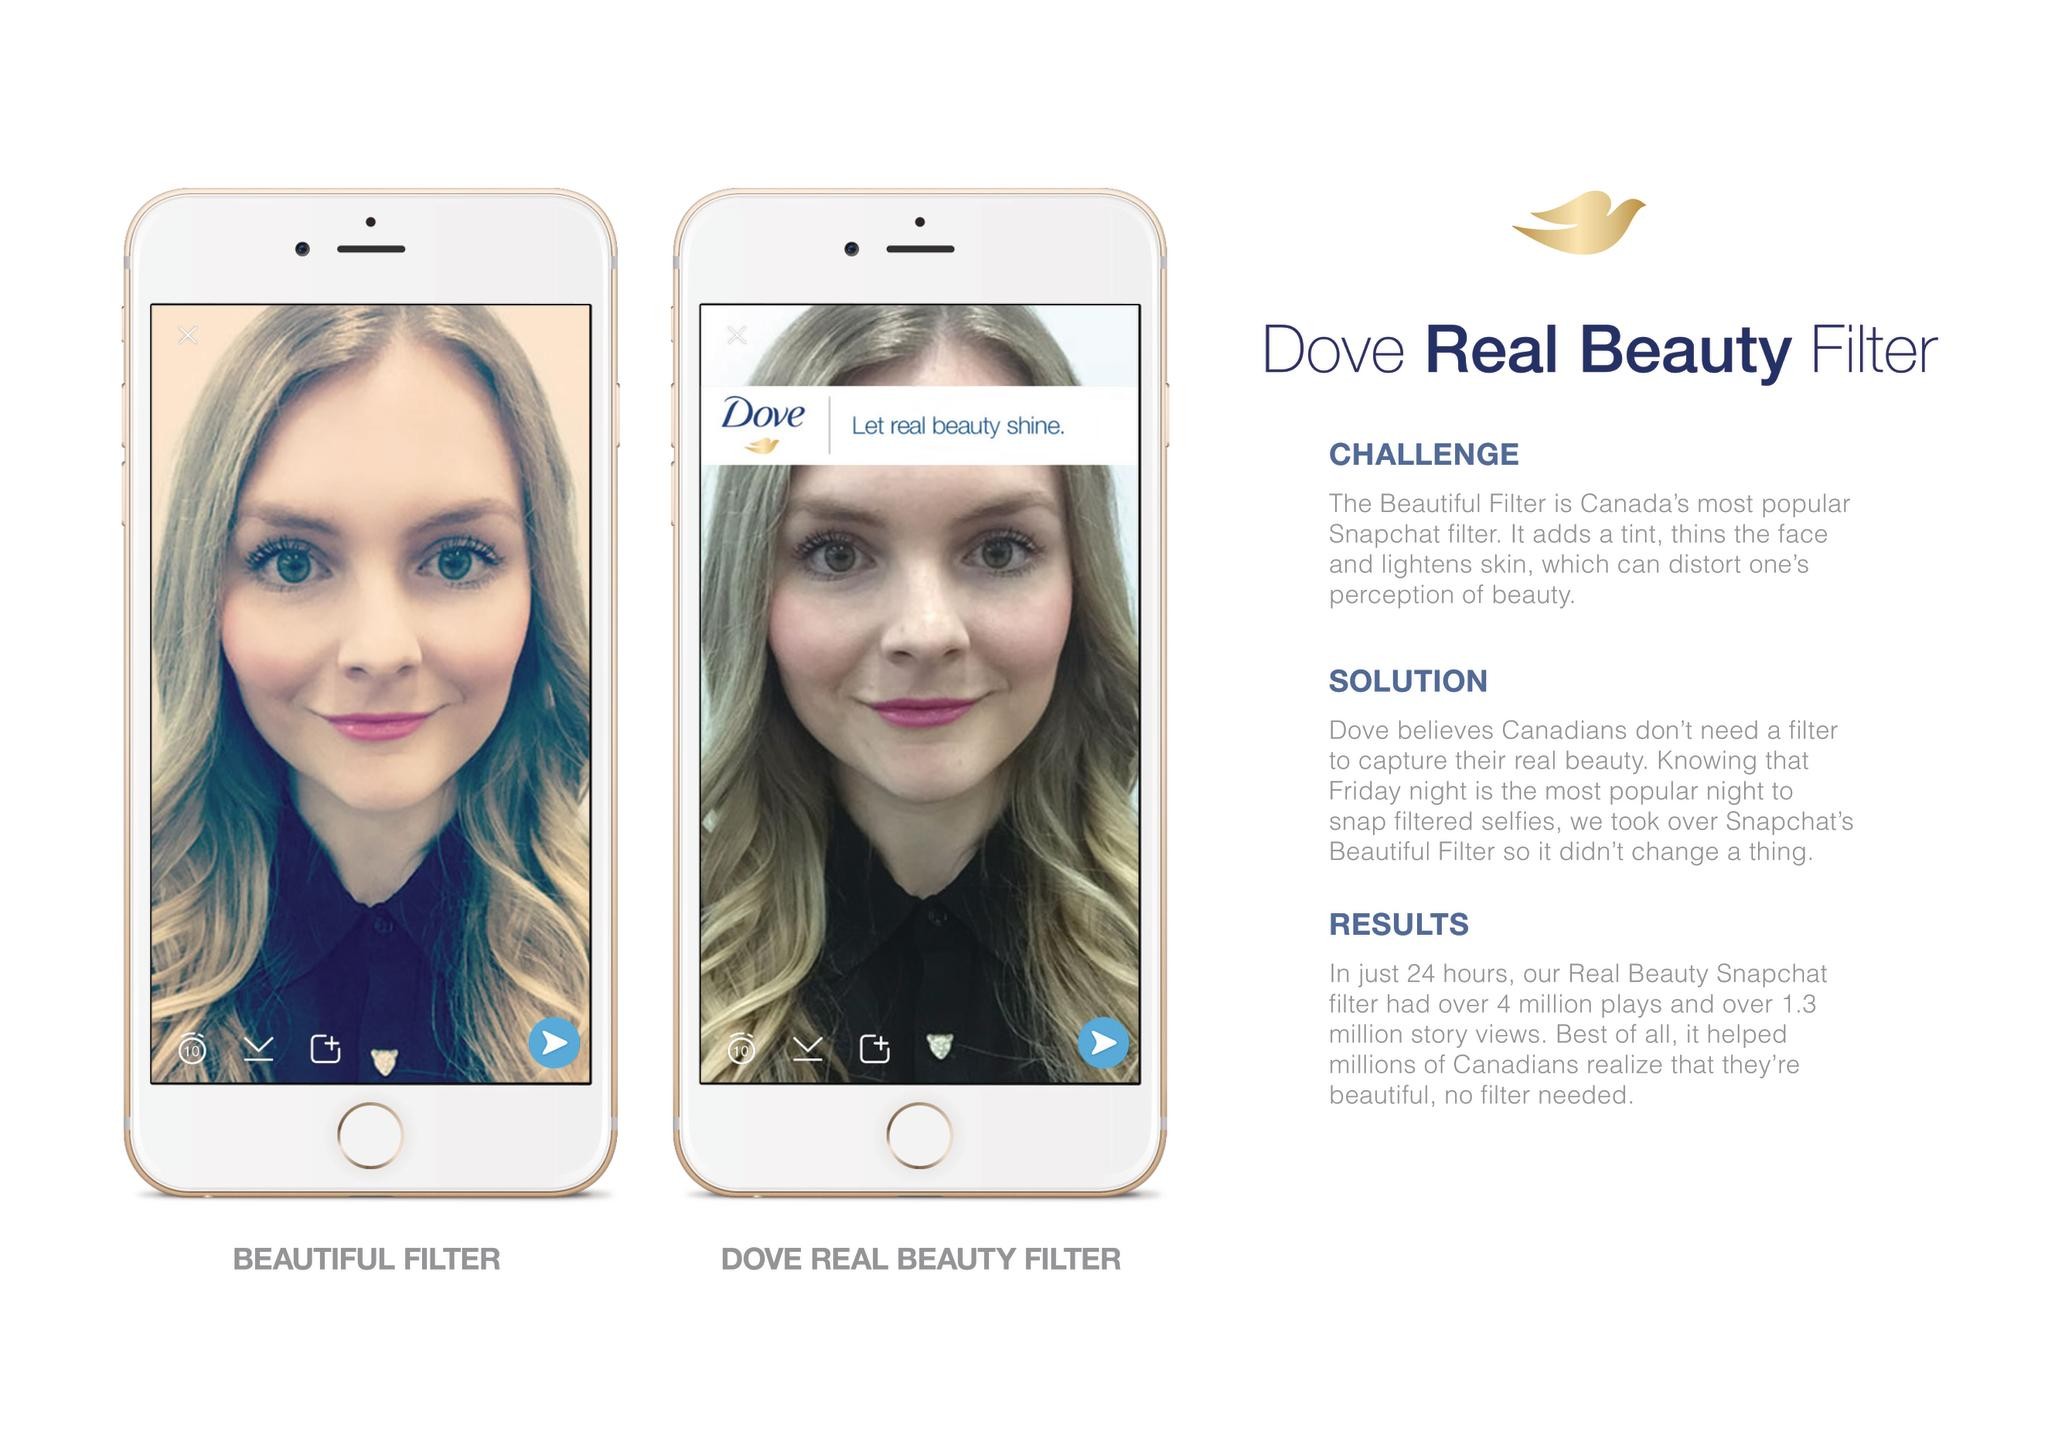 Dove Real Beauty Filter